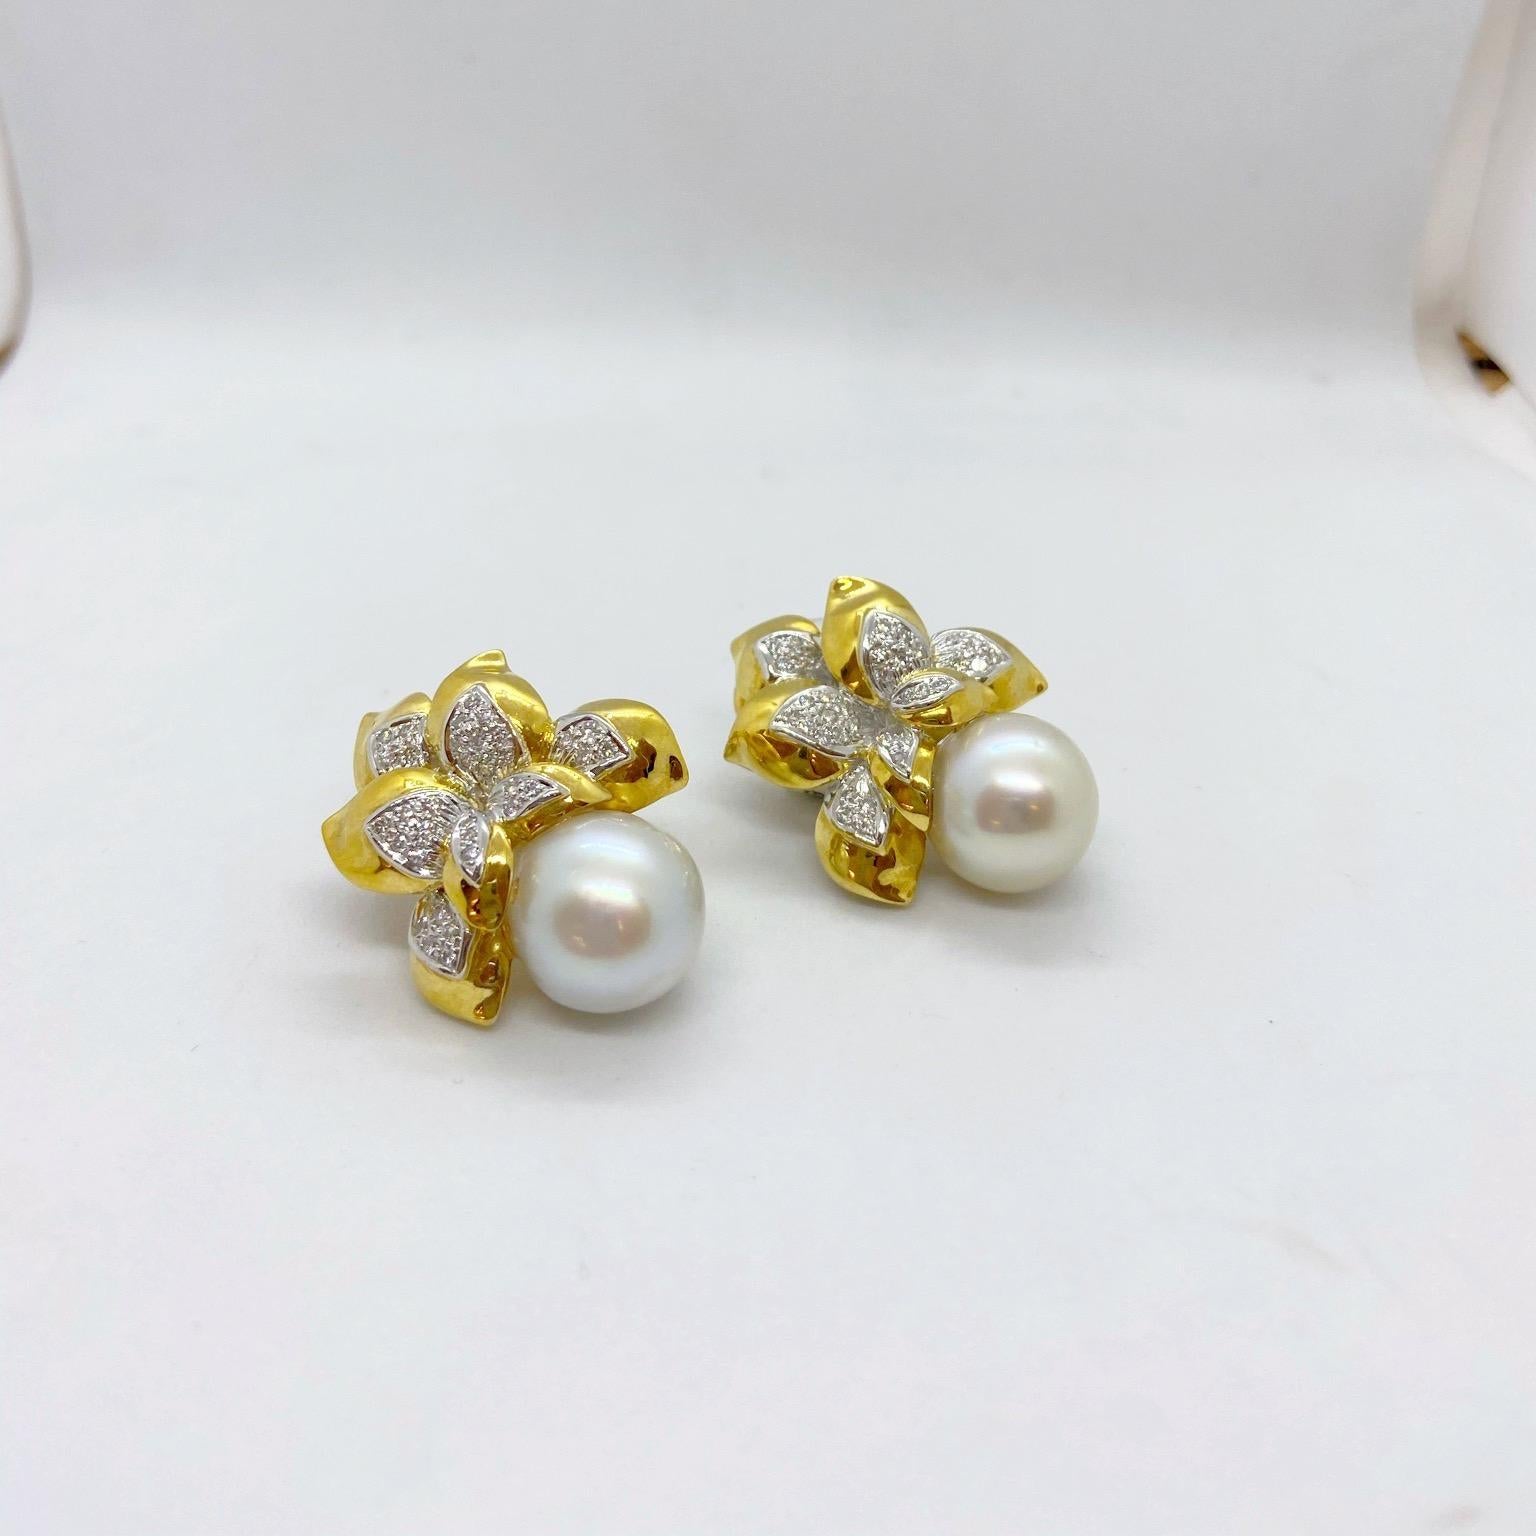 Beautiful ear clips designed in 18 karat yellow gold with hi polished leaves set with pave diamonds. The drop part of the earrings are set with 13mm south Sea pearls. The earrings measure 1-5/8